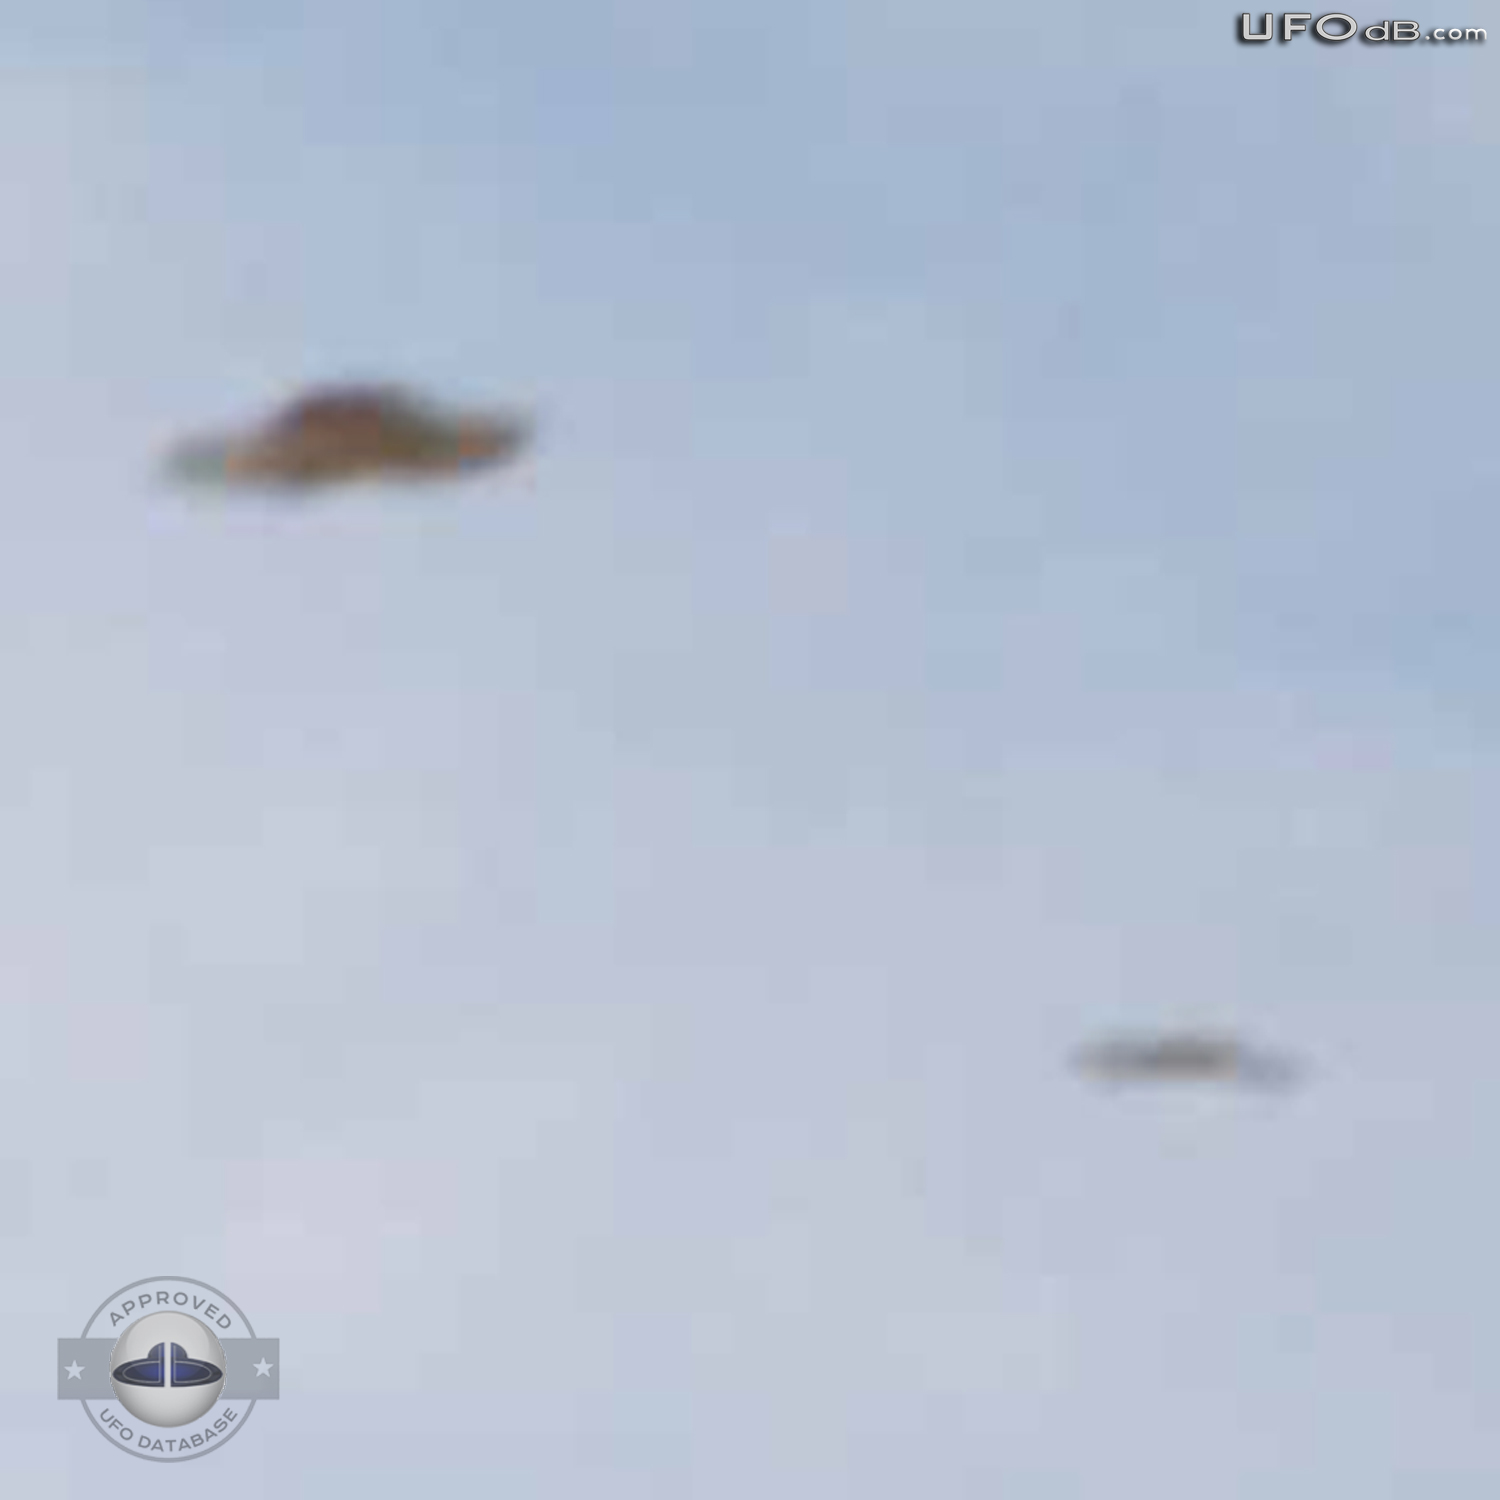 Amsterdam weed grower see three saucer UFOs passing in the sky UFO Picture #366-6